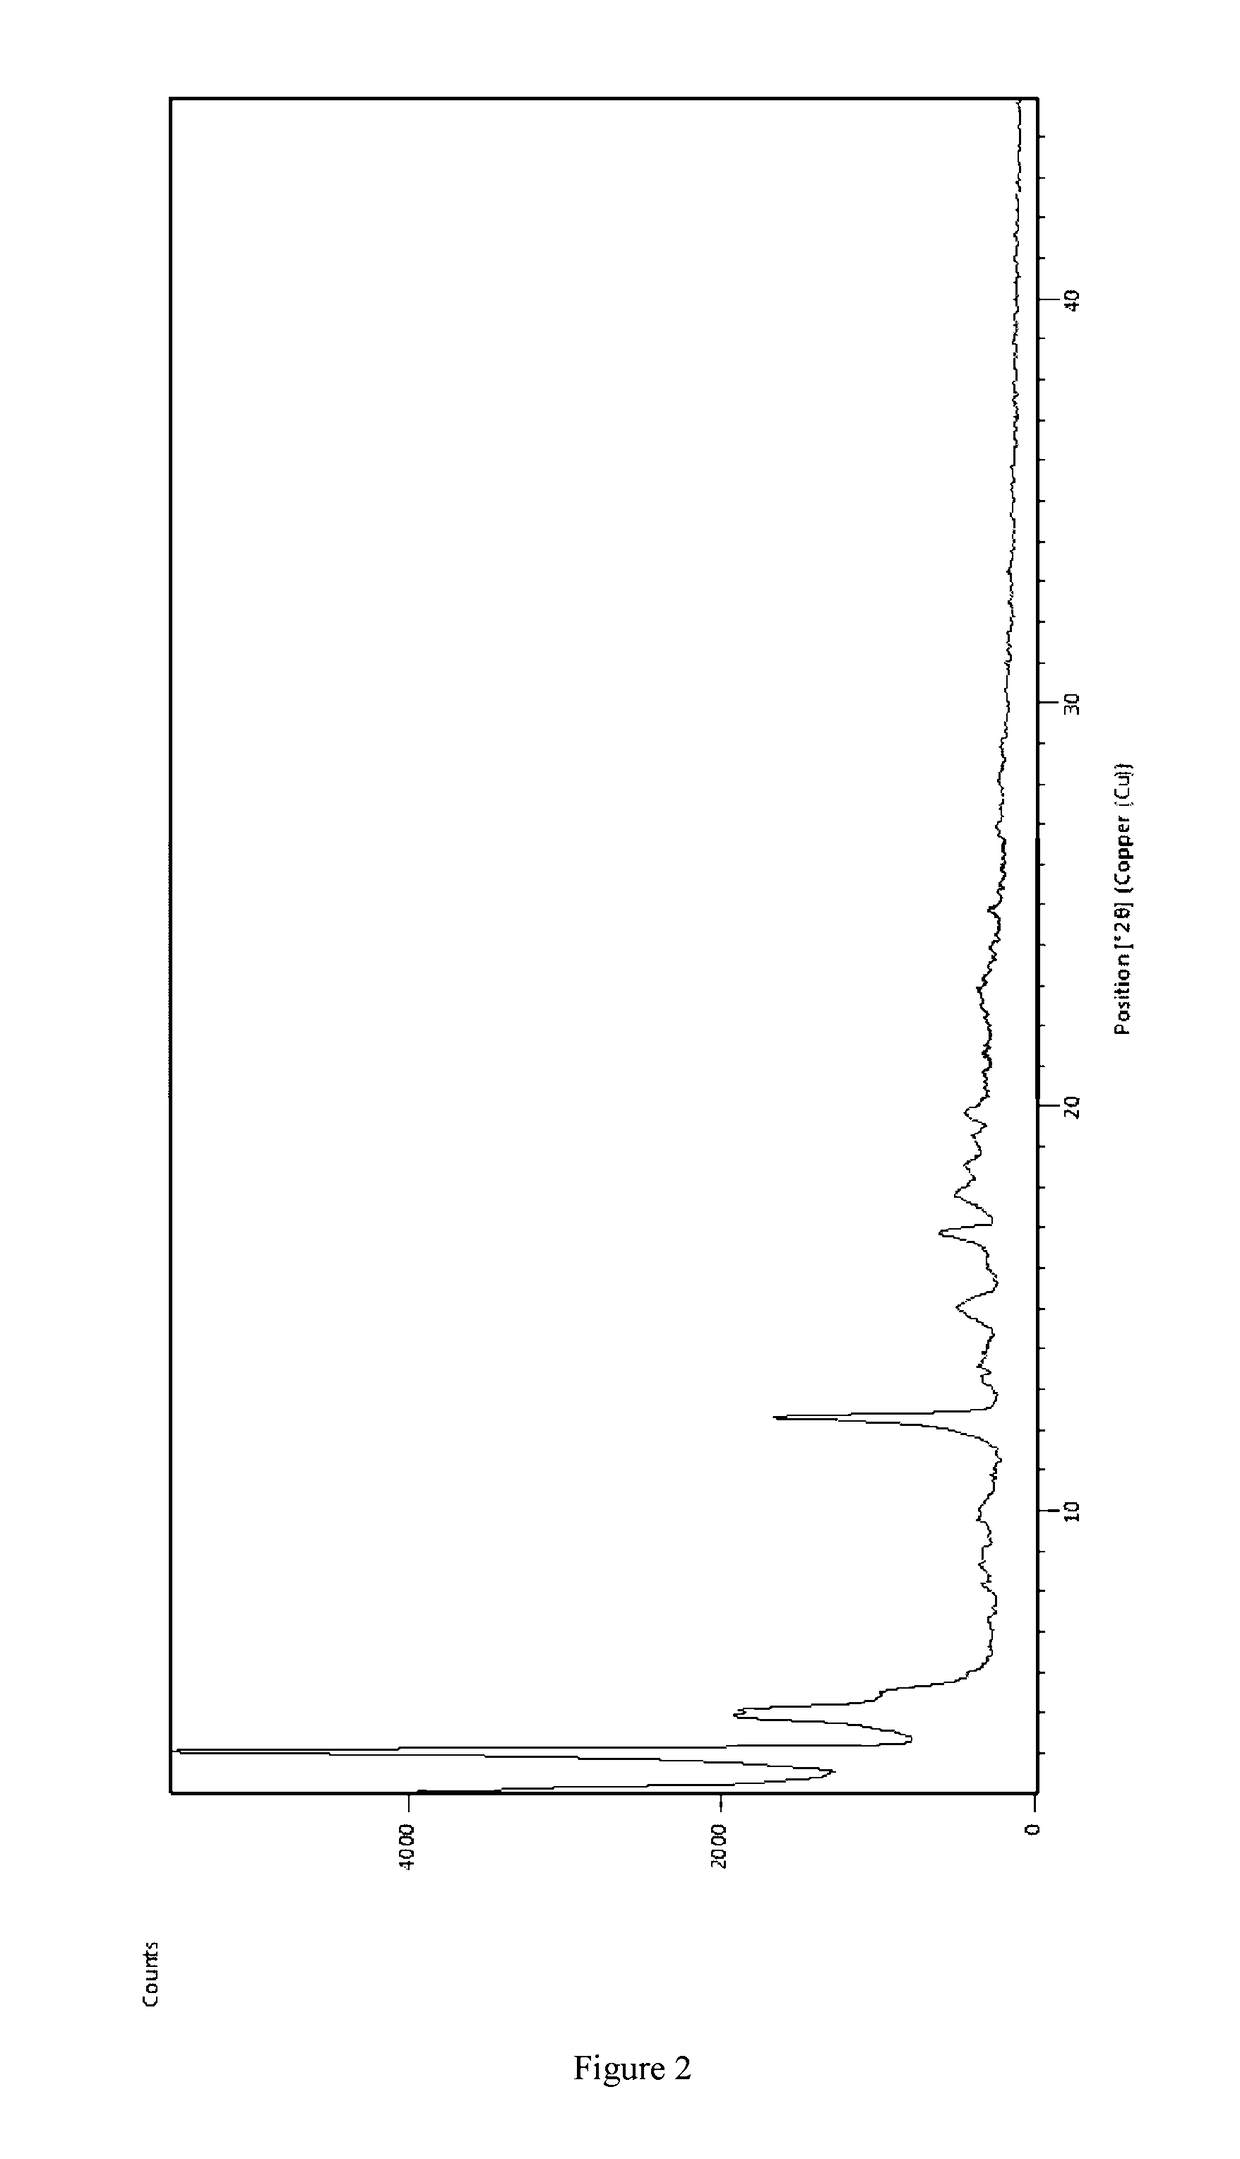 Complex of angiotensin receptor antagonist and neutral endopeptidase inhibitor